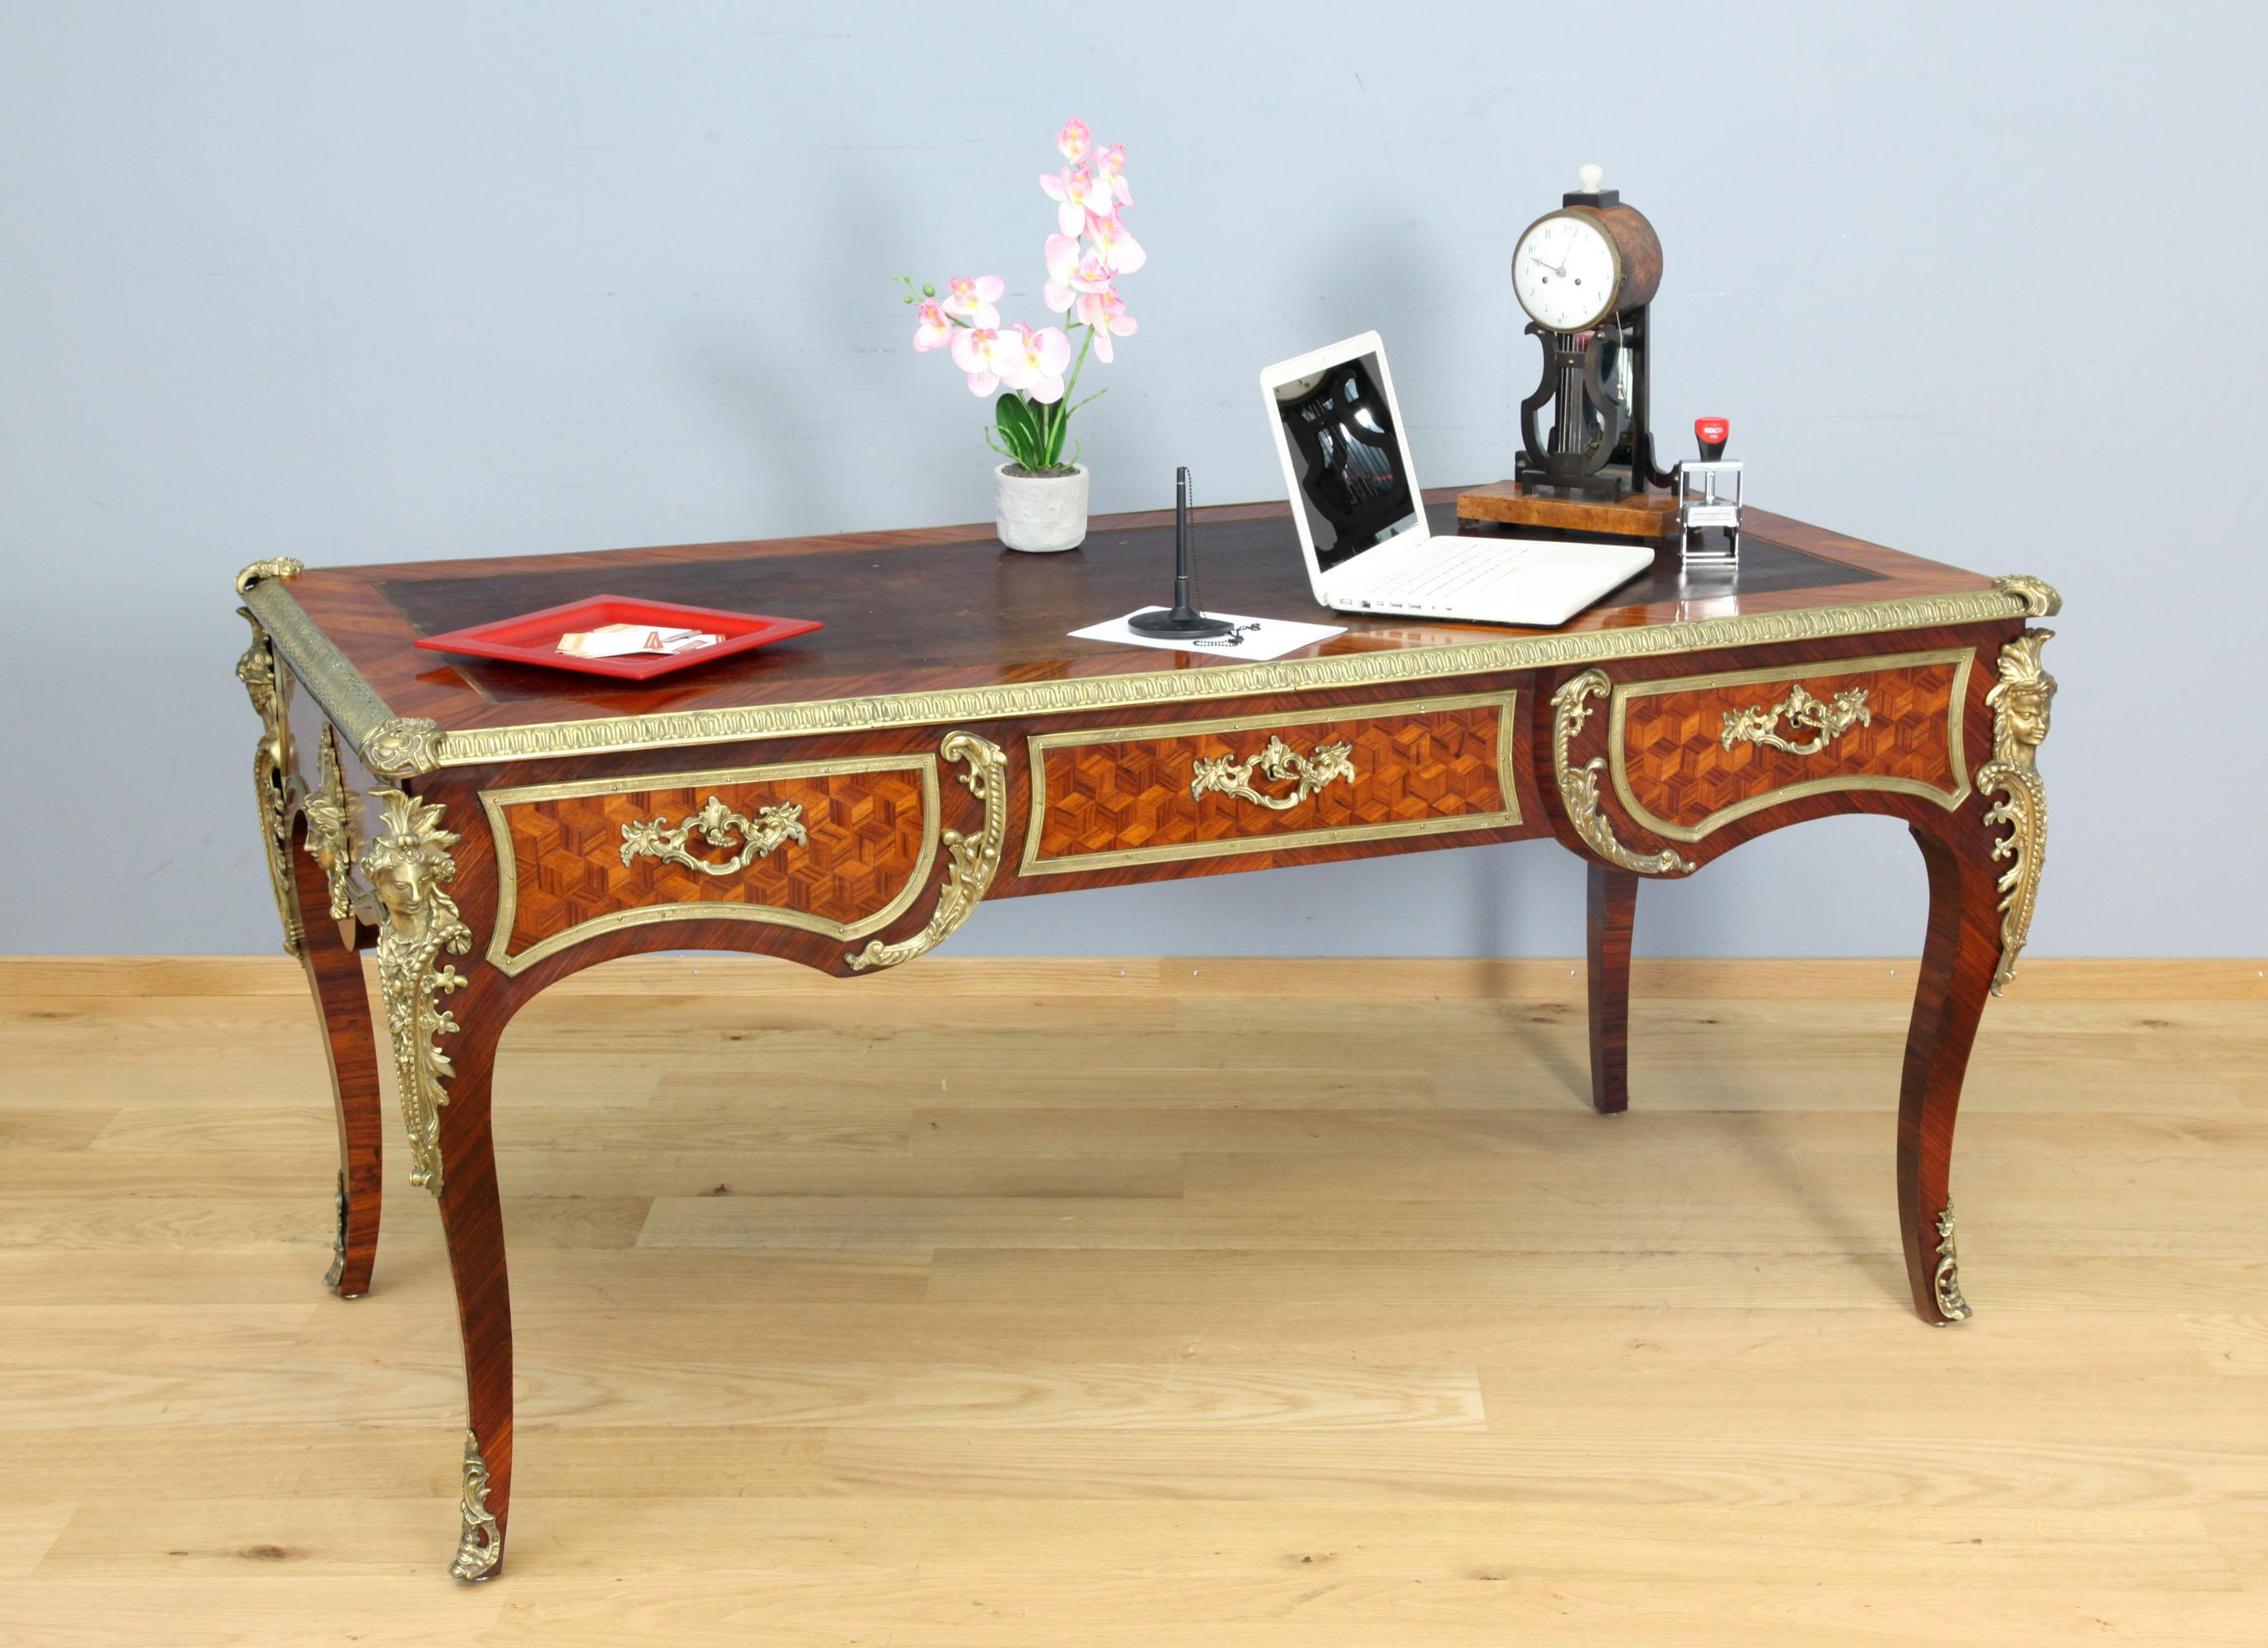 Splendid Bureau Plat veneered with rosewood and decorated with bronze applications, France 19th century. Bureau Plat is in restored condition with shellac polished surface. 

This generous desk stands on tall curved legs and is free standing in